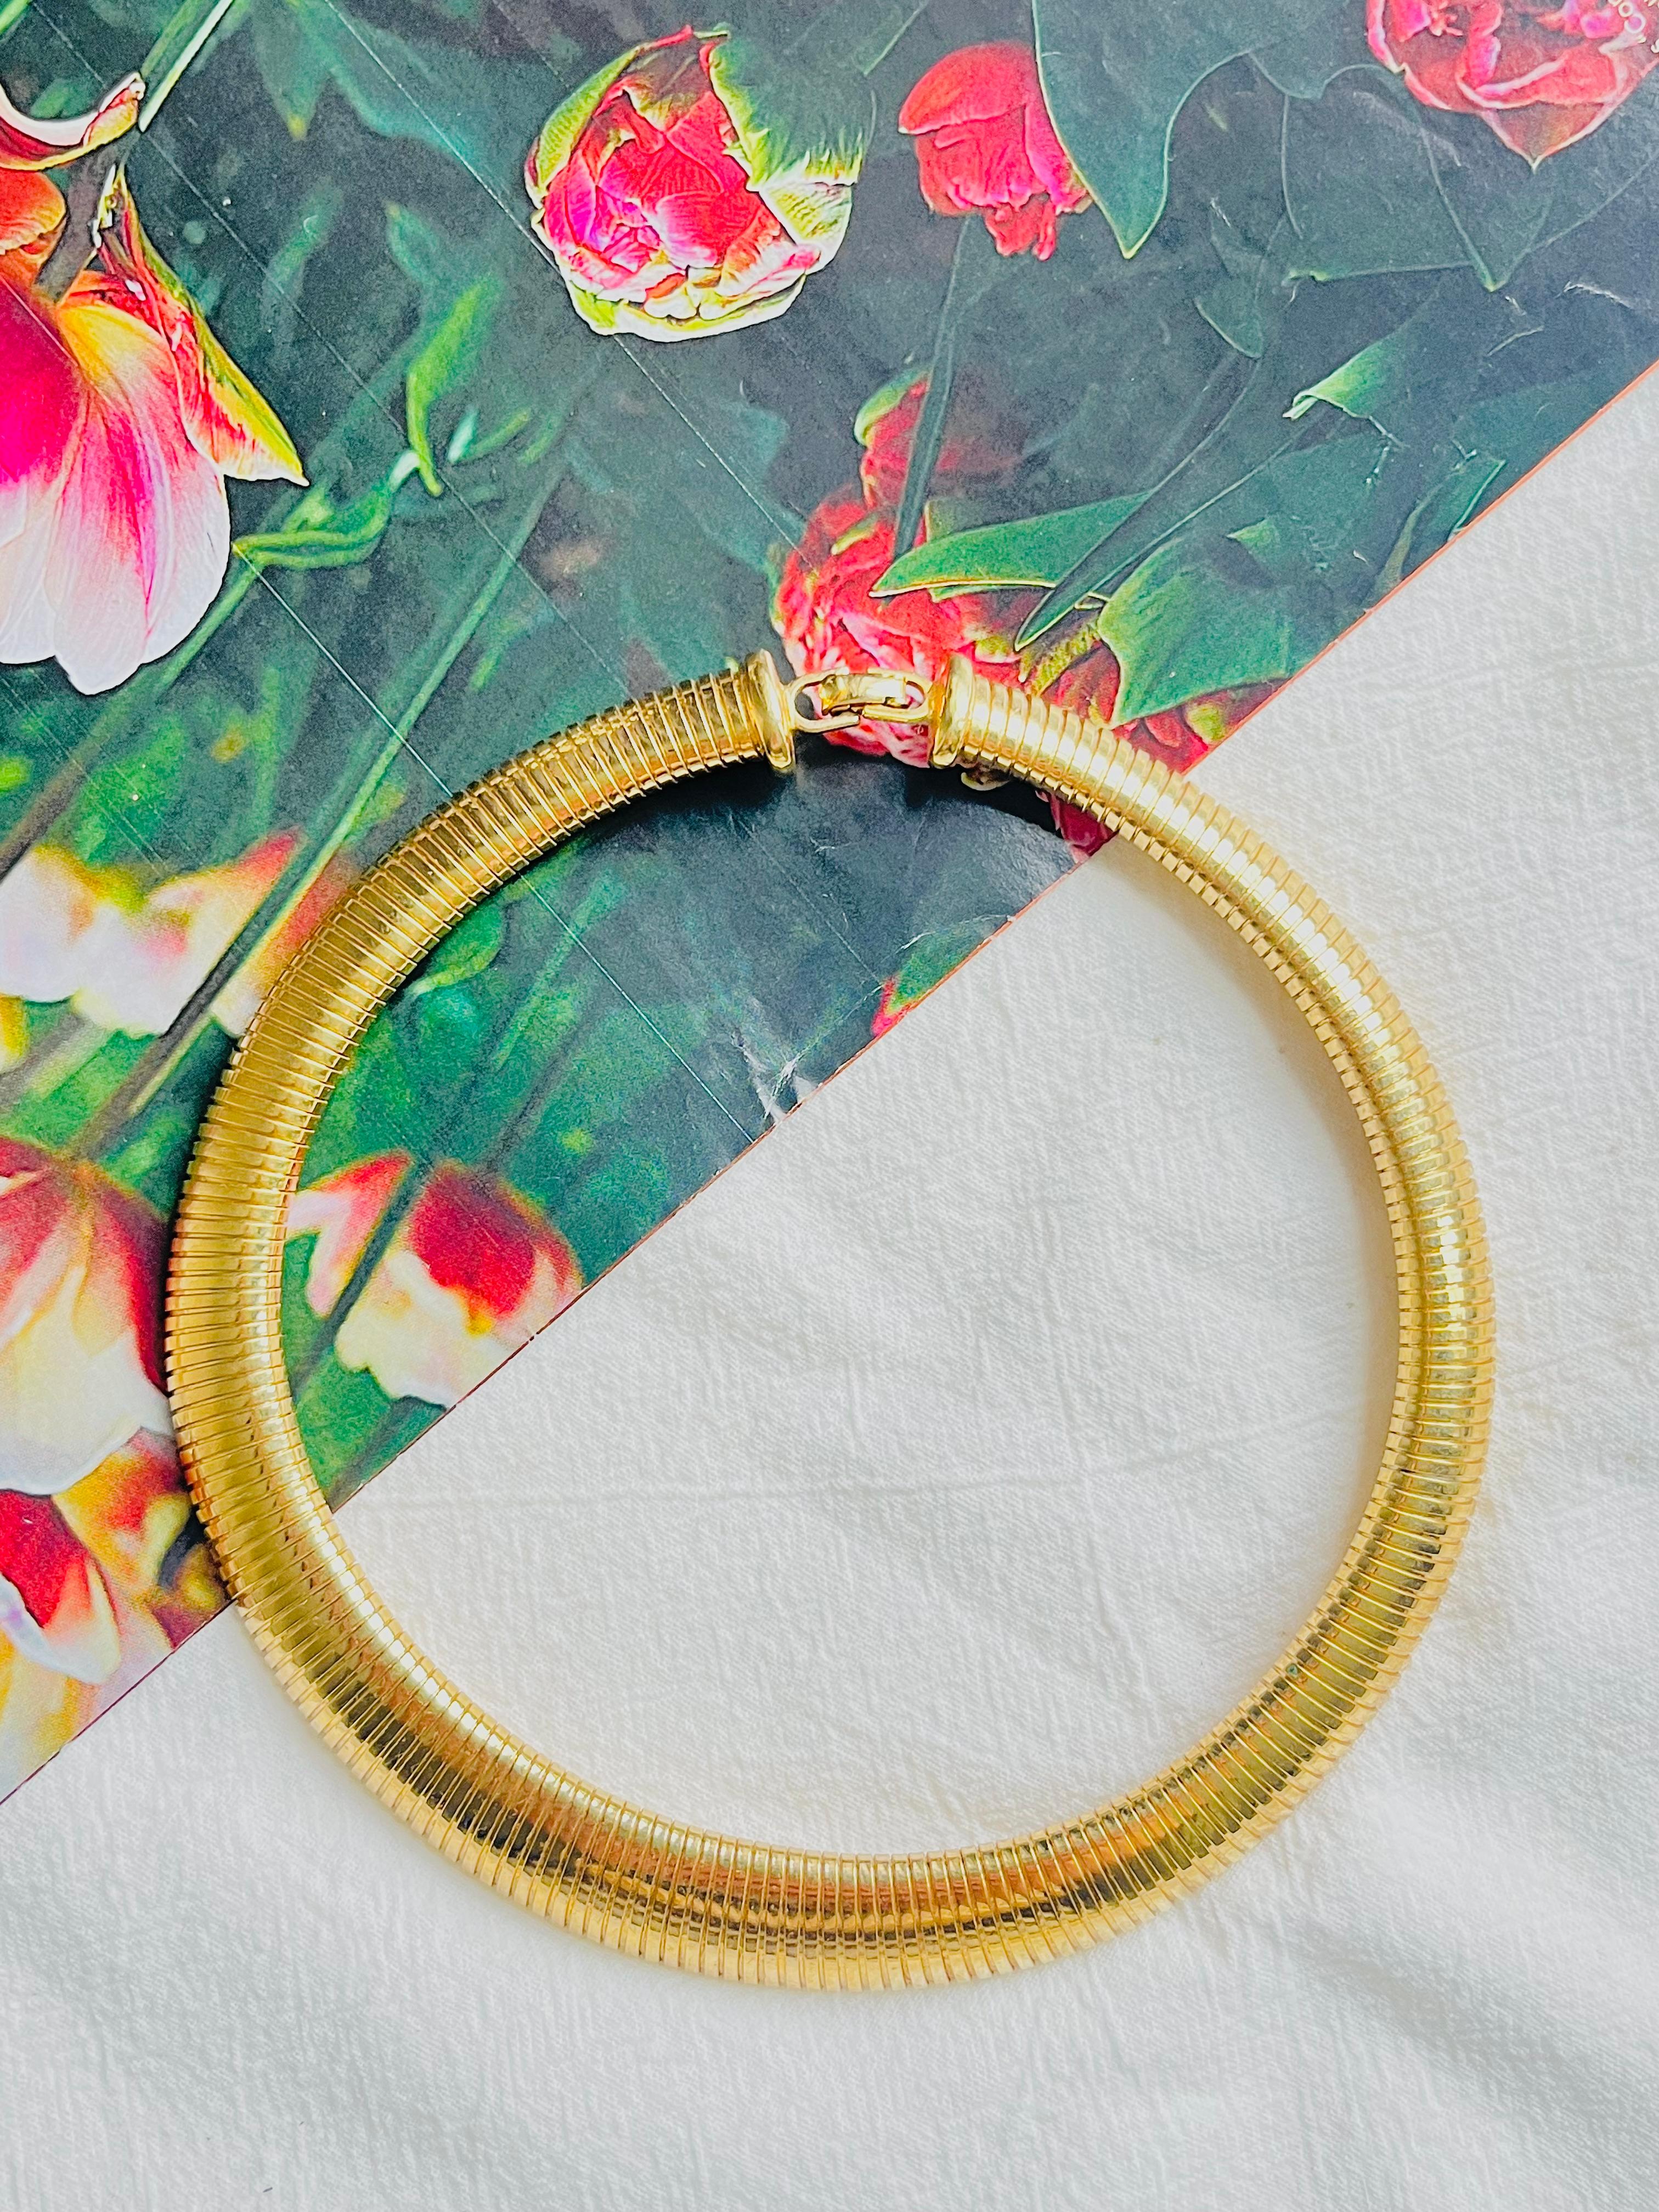 Christian Dior Vintage 1980s Unisex Ribbed Omega Snake Choker Collar Necklace, Gold Plated

Very excellent condition. Not any colour loss. 100% Genuine.

Crafted from polished gold plated with a circular design, this choker necklace from Christian